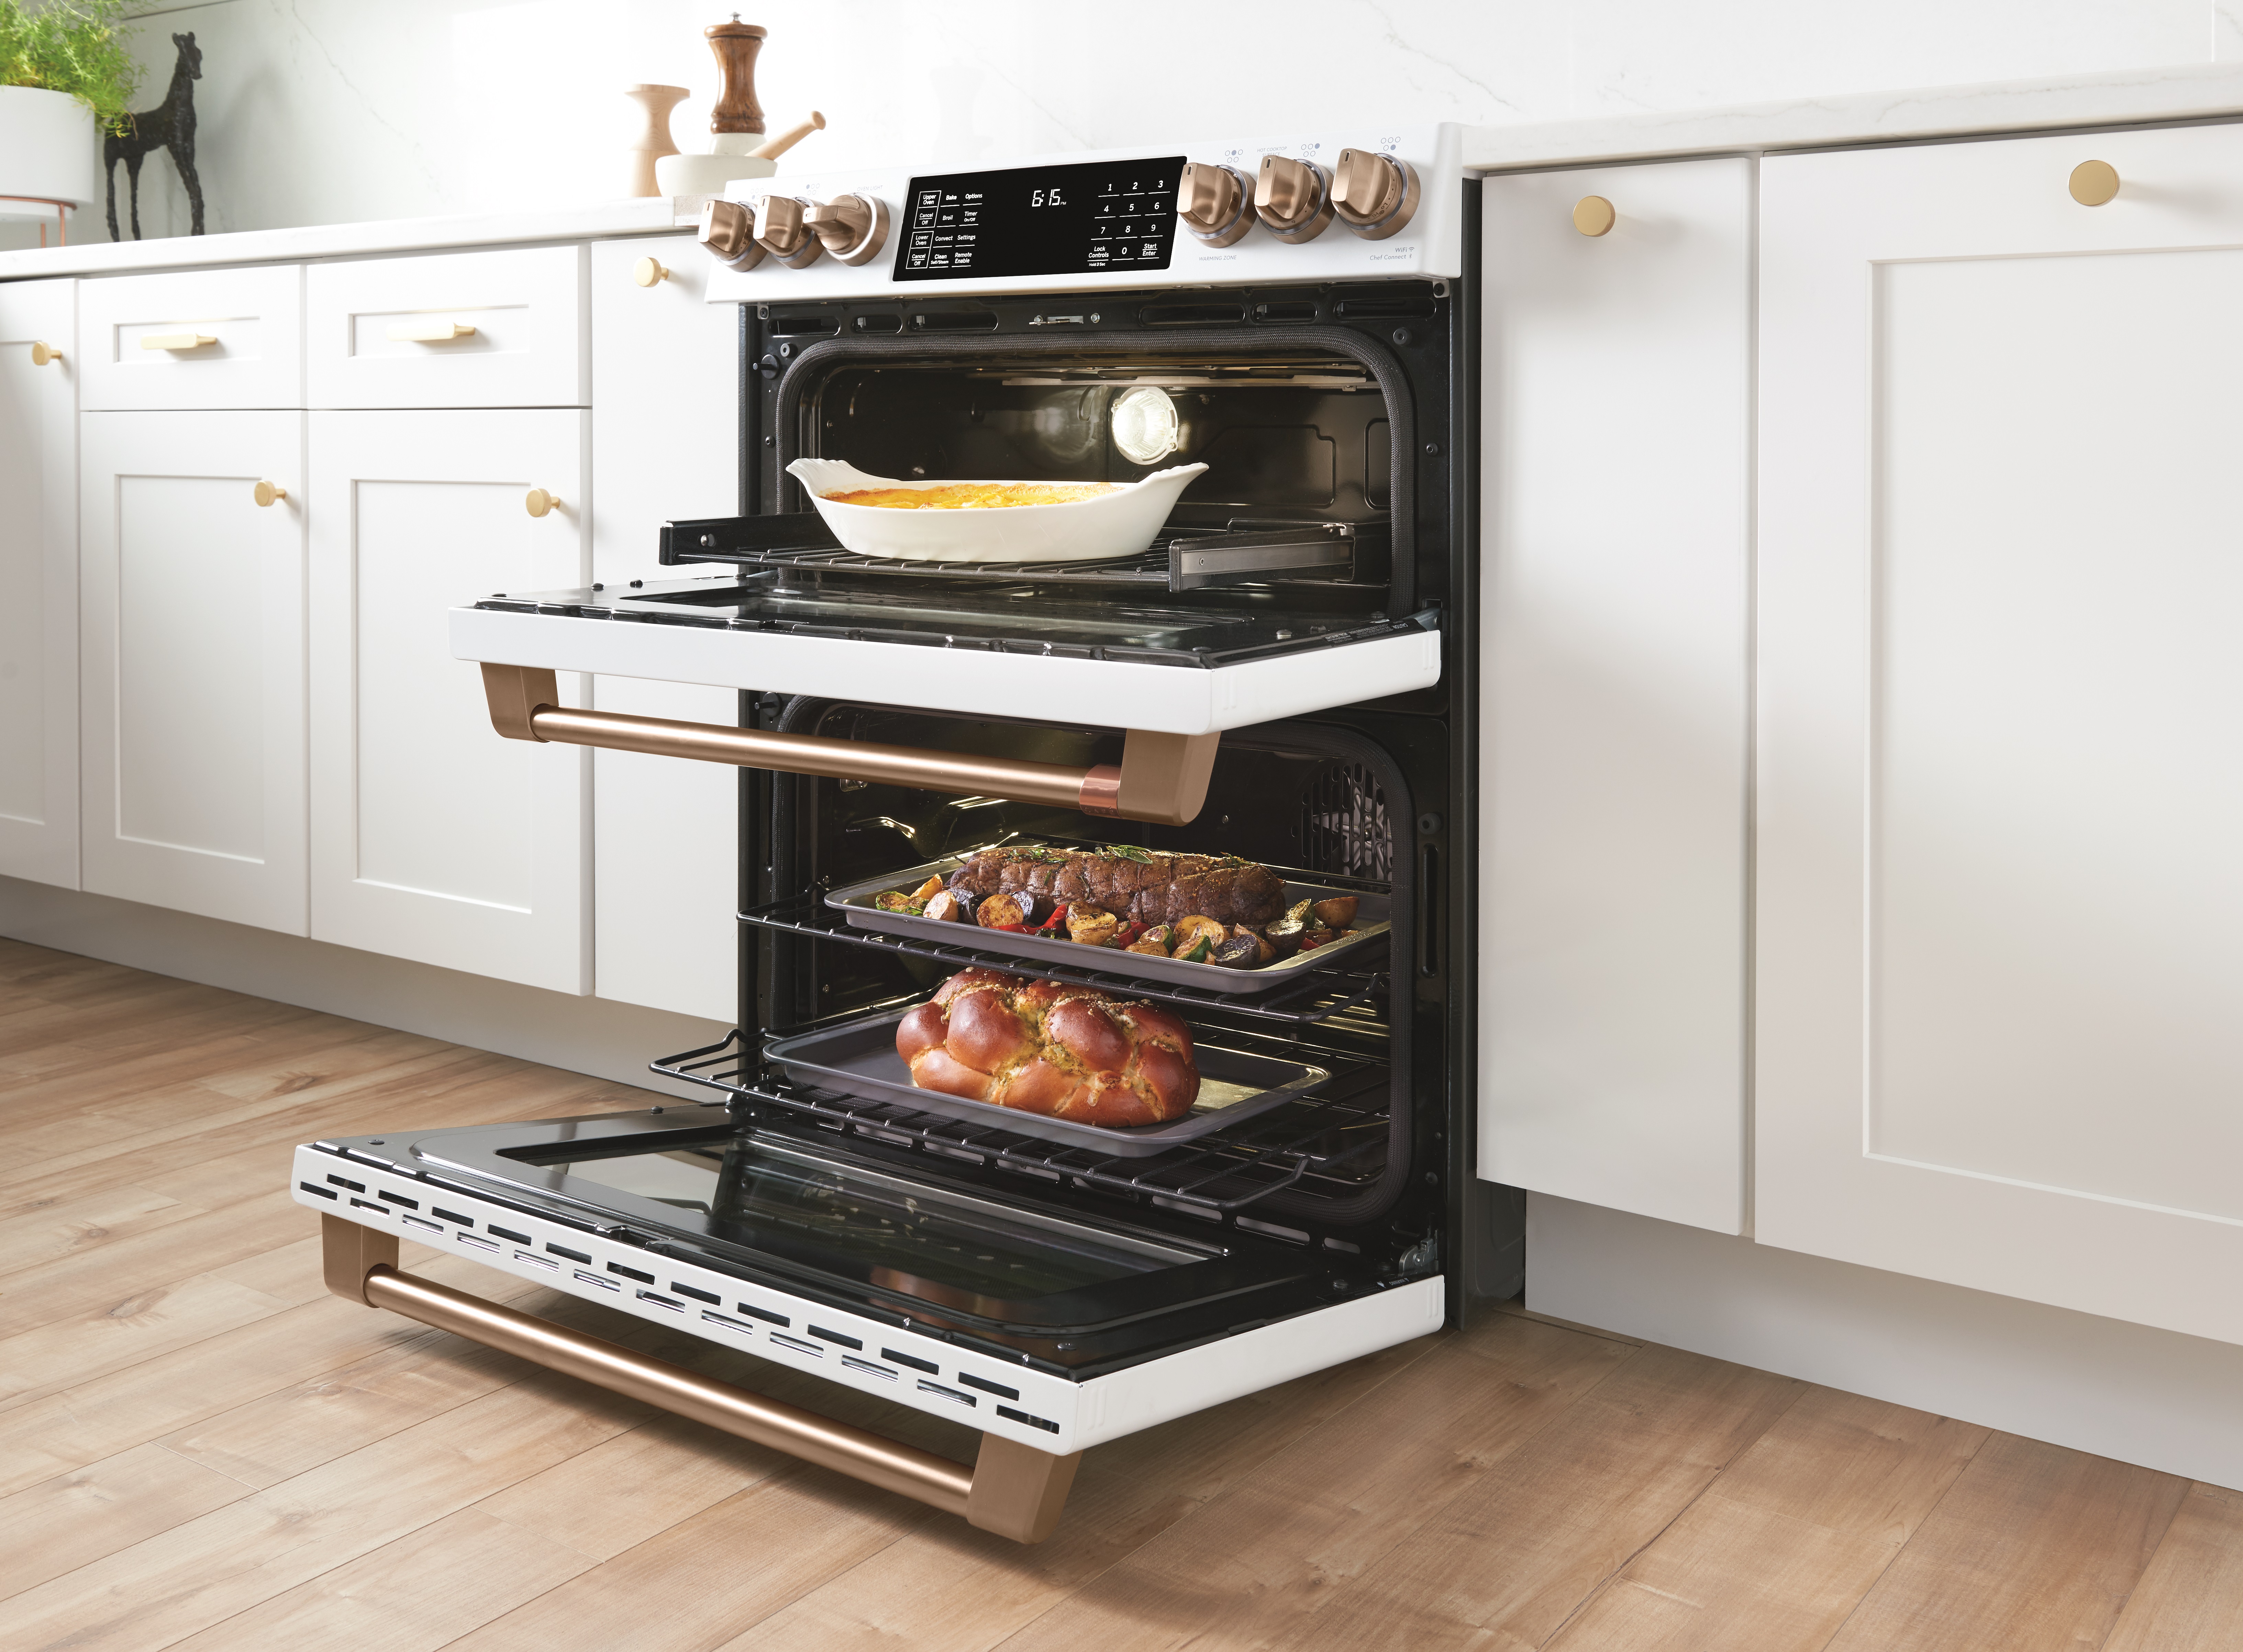 A double oven gas range with doors ajar and food cooking inside